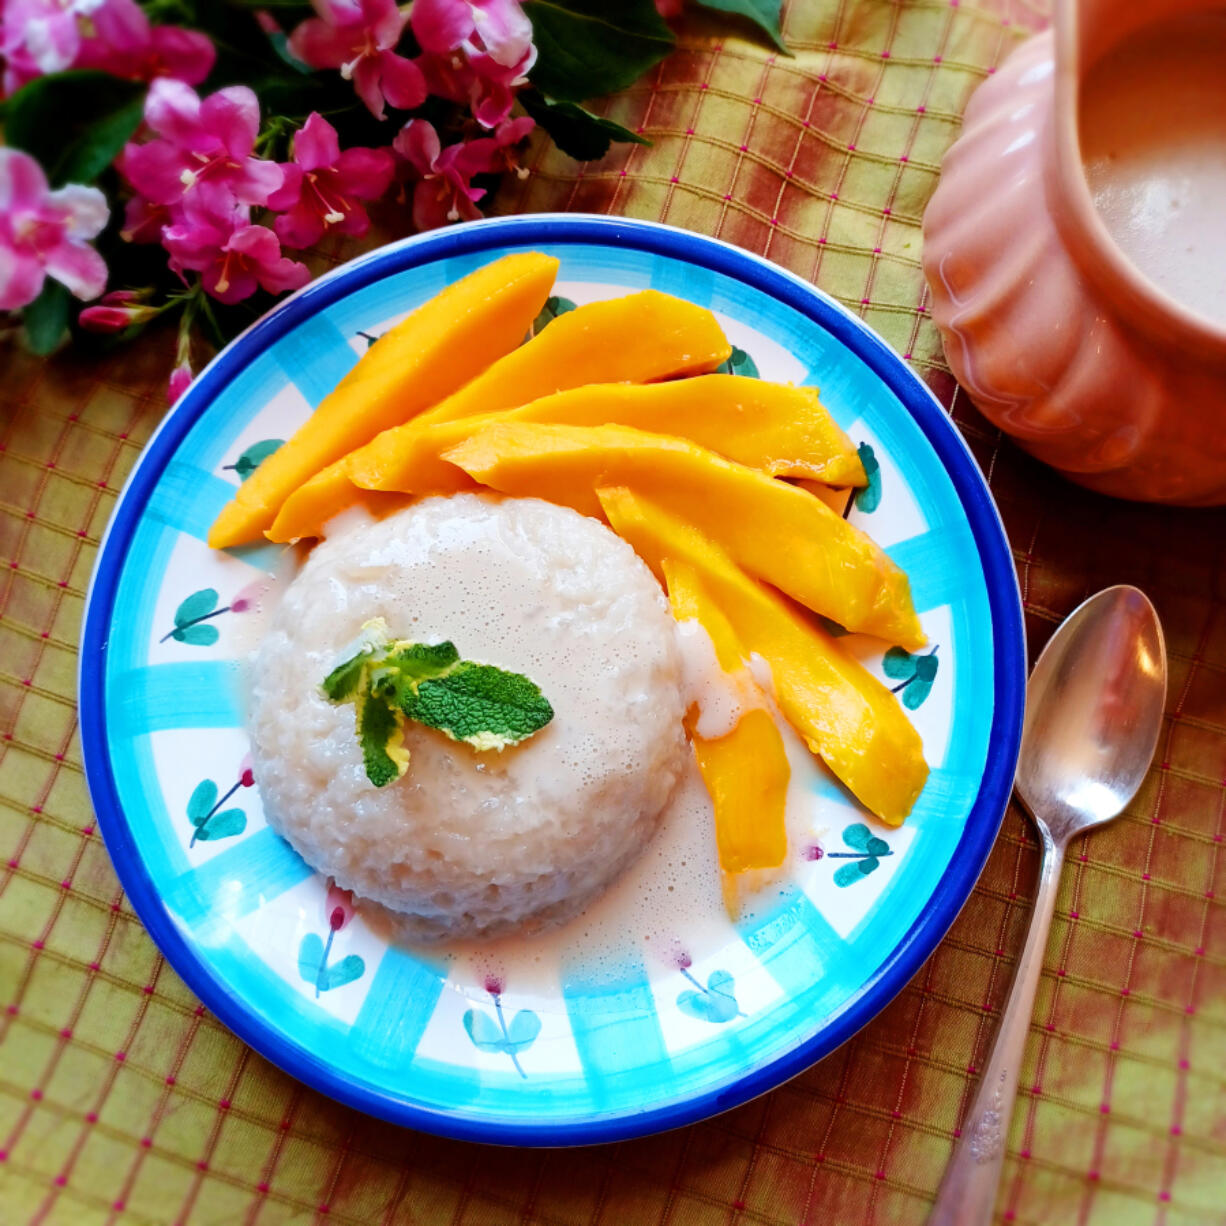 This Thai dessert marries super-sweet mangoes with super-sweet sticky rice drenched in coconut milk.